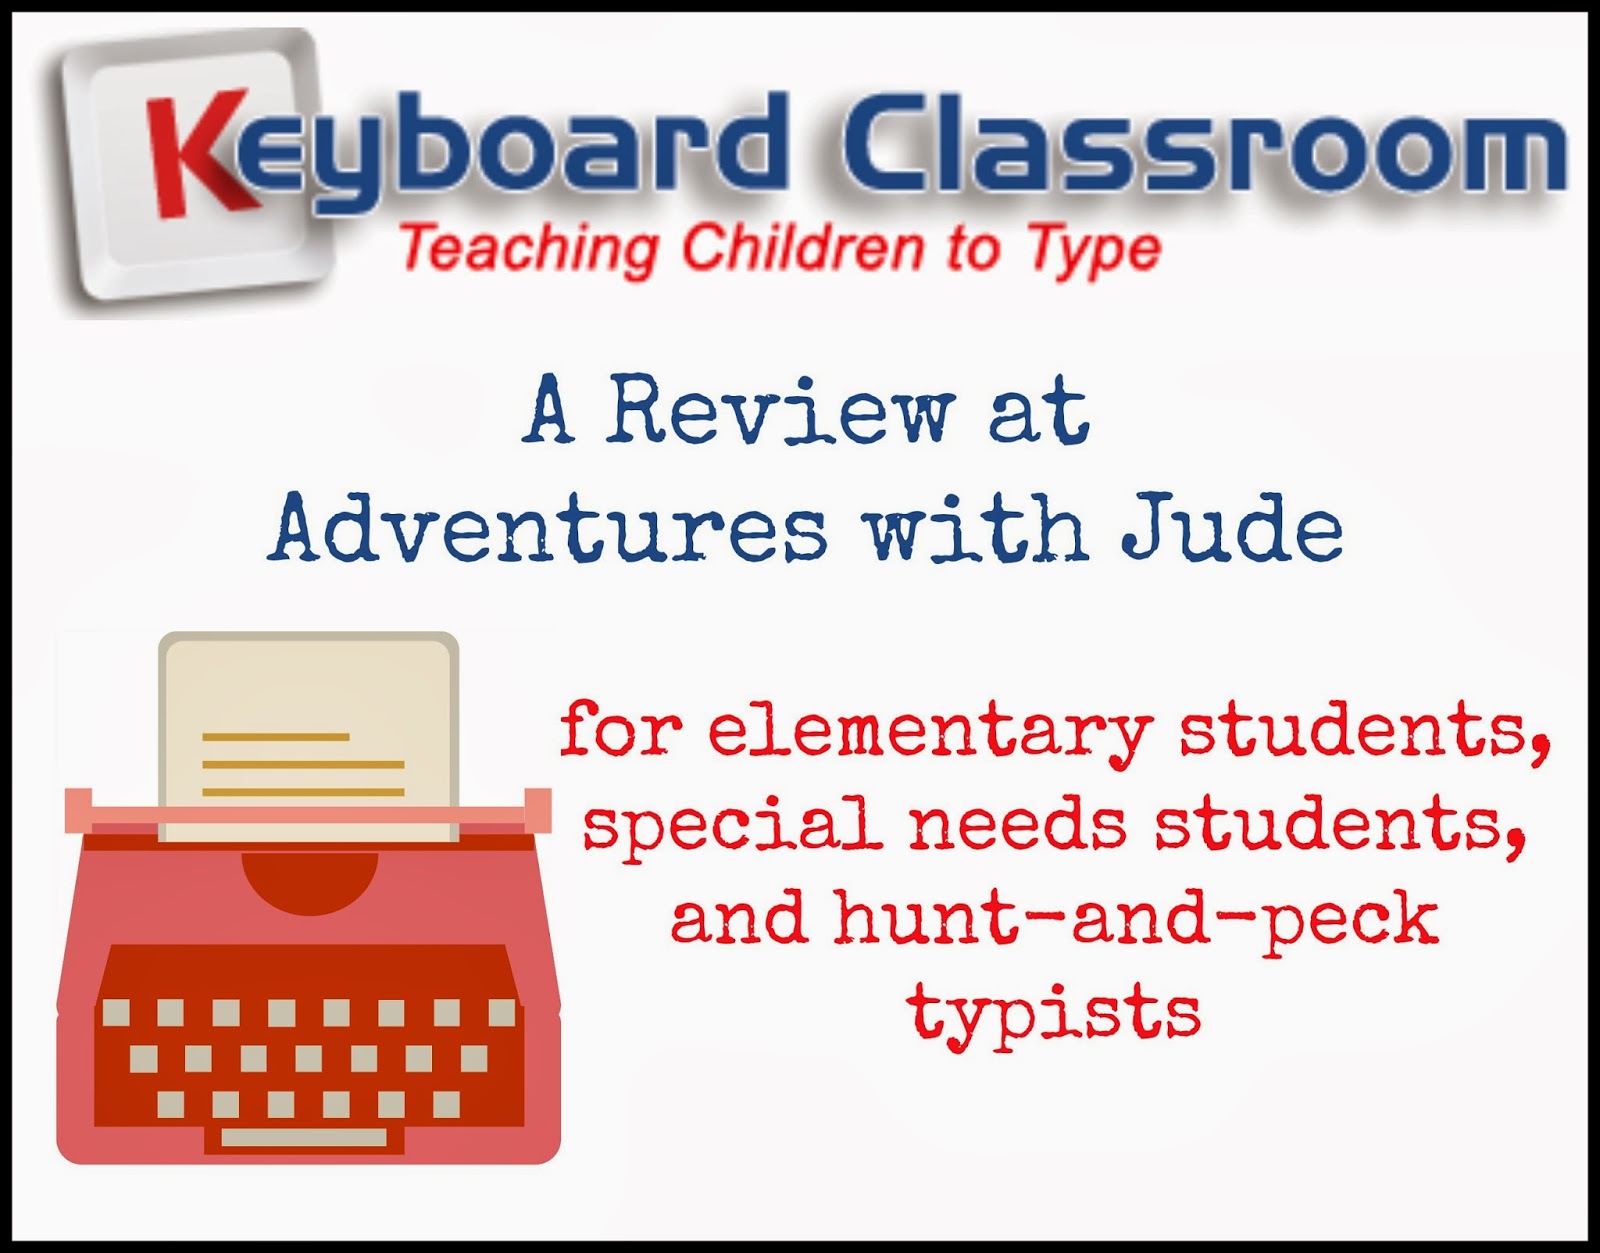 Keyboard Classroom - for elementary, special needs, and hunt-peck typists